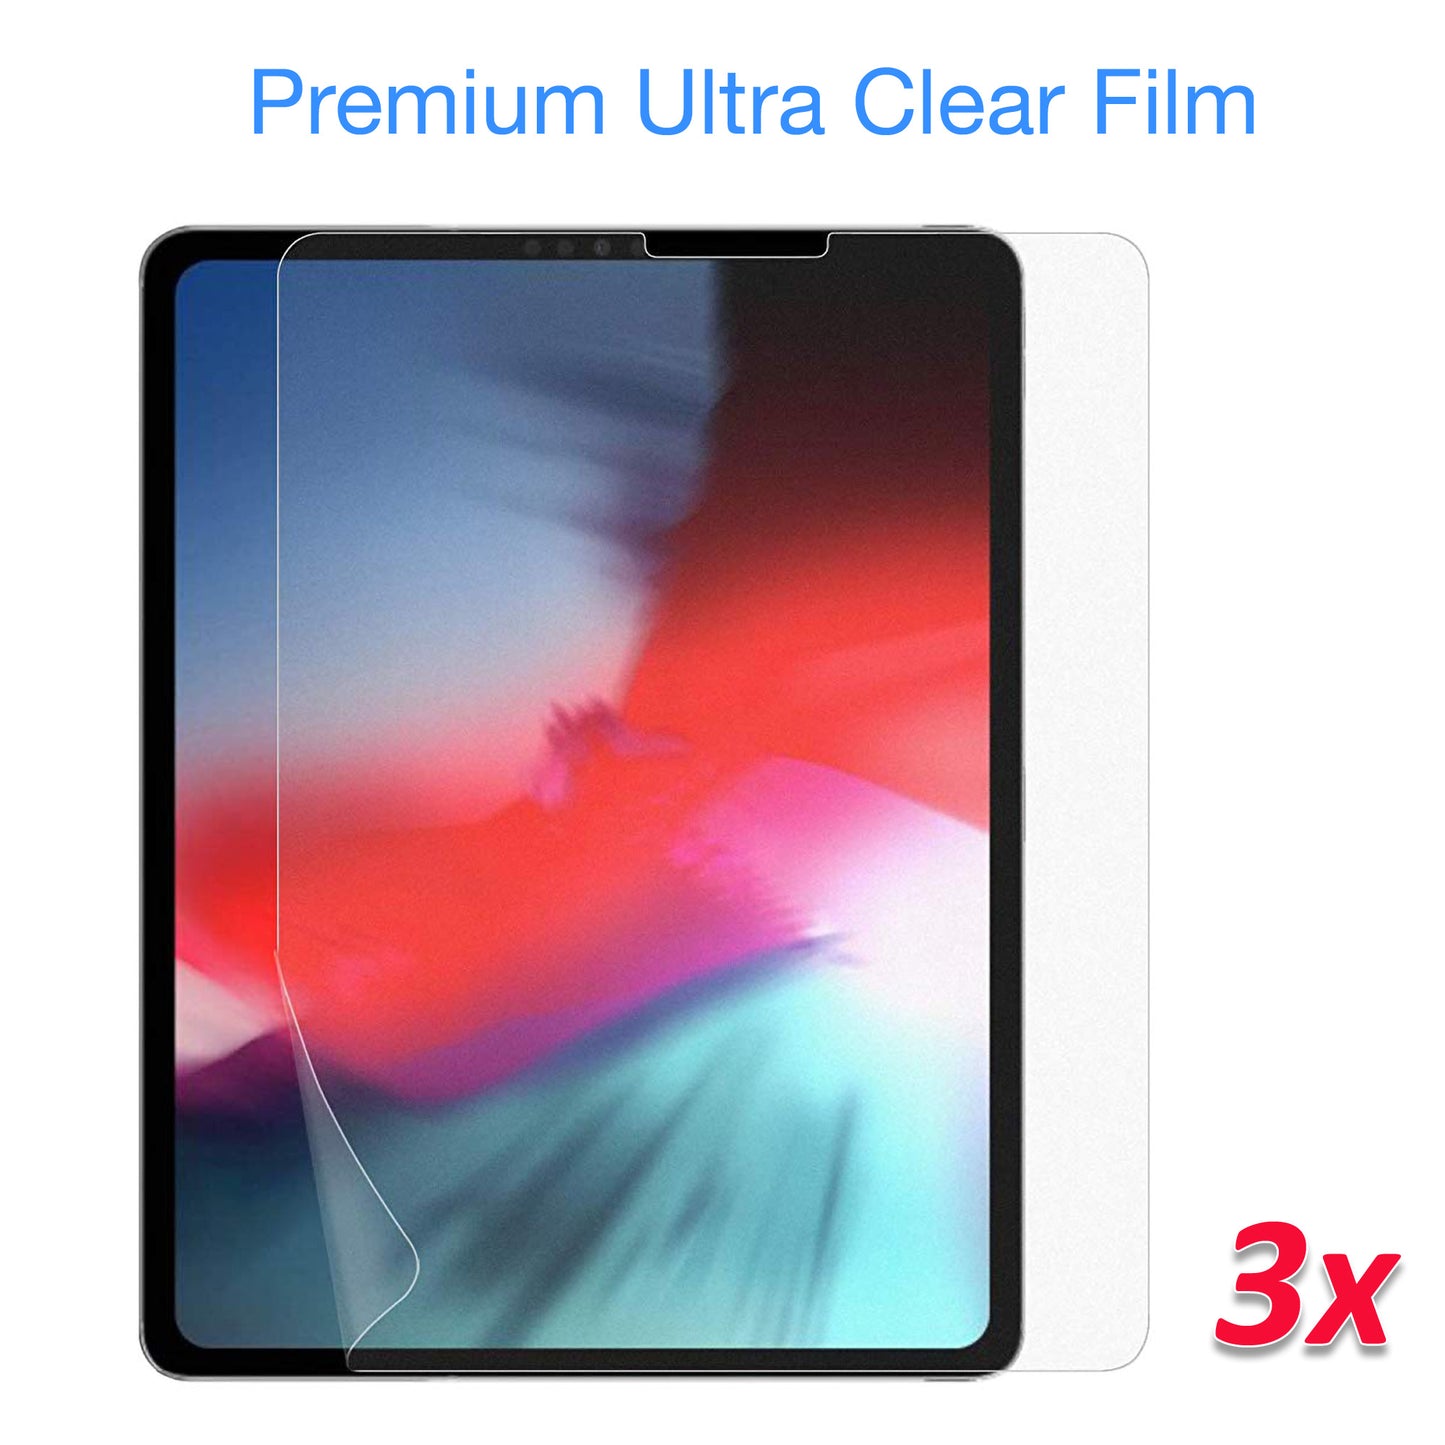 [3 Pack] MEZON Apple iPad Pro 12.9" 2018 Ultra Clear Film Case and Pencil Friendly Screen Protector (iPad Pro 12.9", Clear)